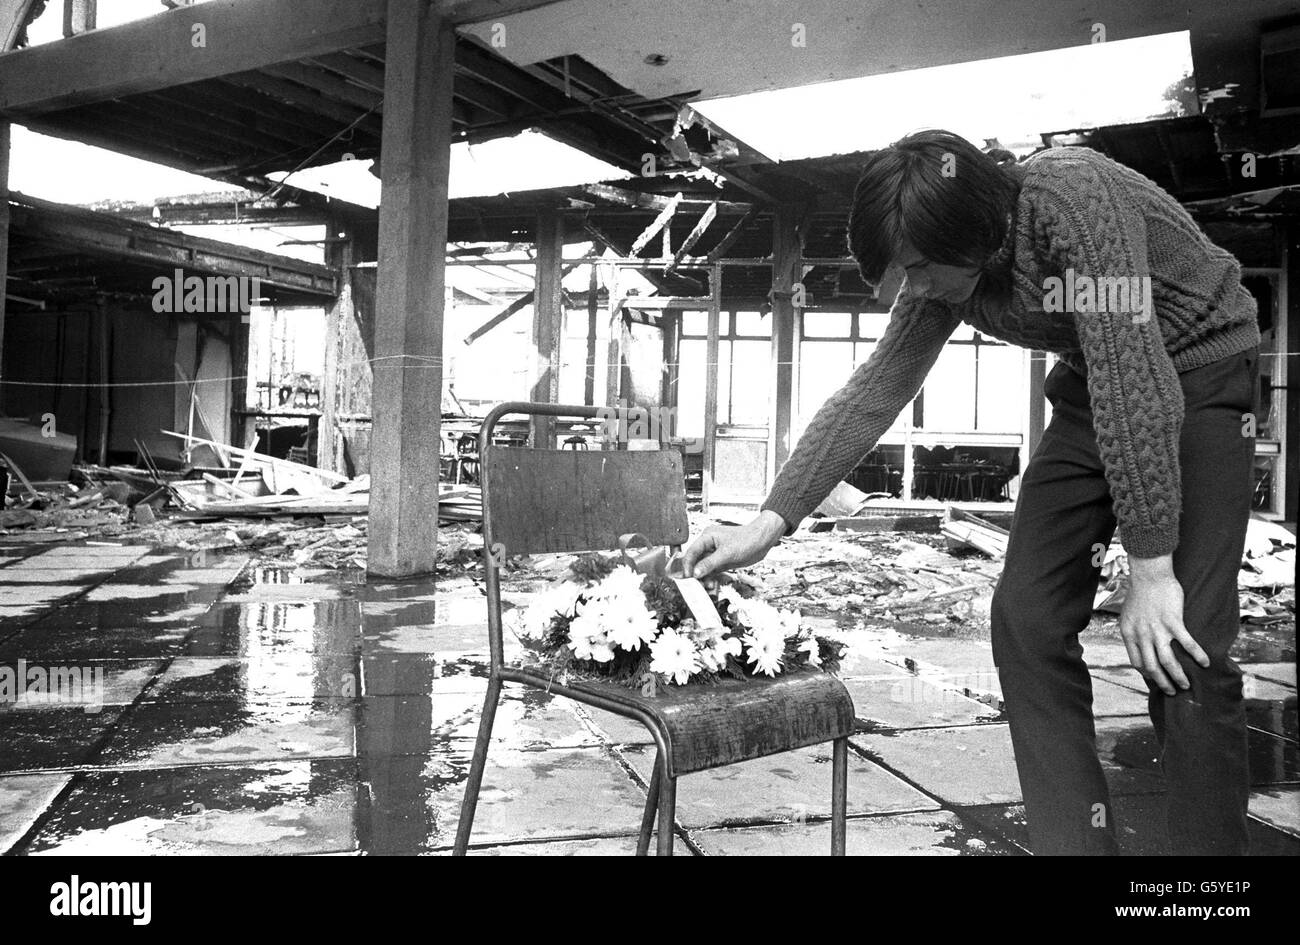 Norman Hogg, 18, examines a wreath placed on a chair in the Oxford Street bus station which was devastated in the 'Bloody Friday' bomb blitz in Belfast. Norman's three colleagues in the parcel office were among the people killed. *16/07/02 The IRA has apologised to all non-combatants who were killed during 30 years of violence, Tuesday 16 July, 2002. Stock Photo